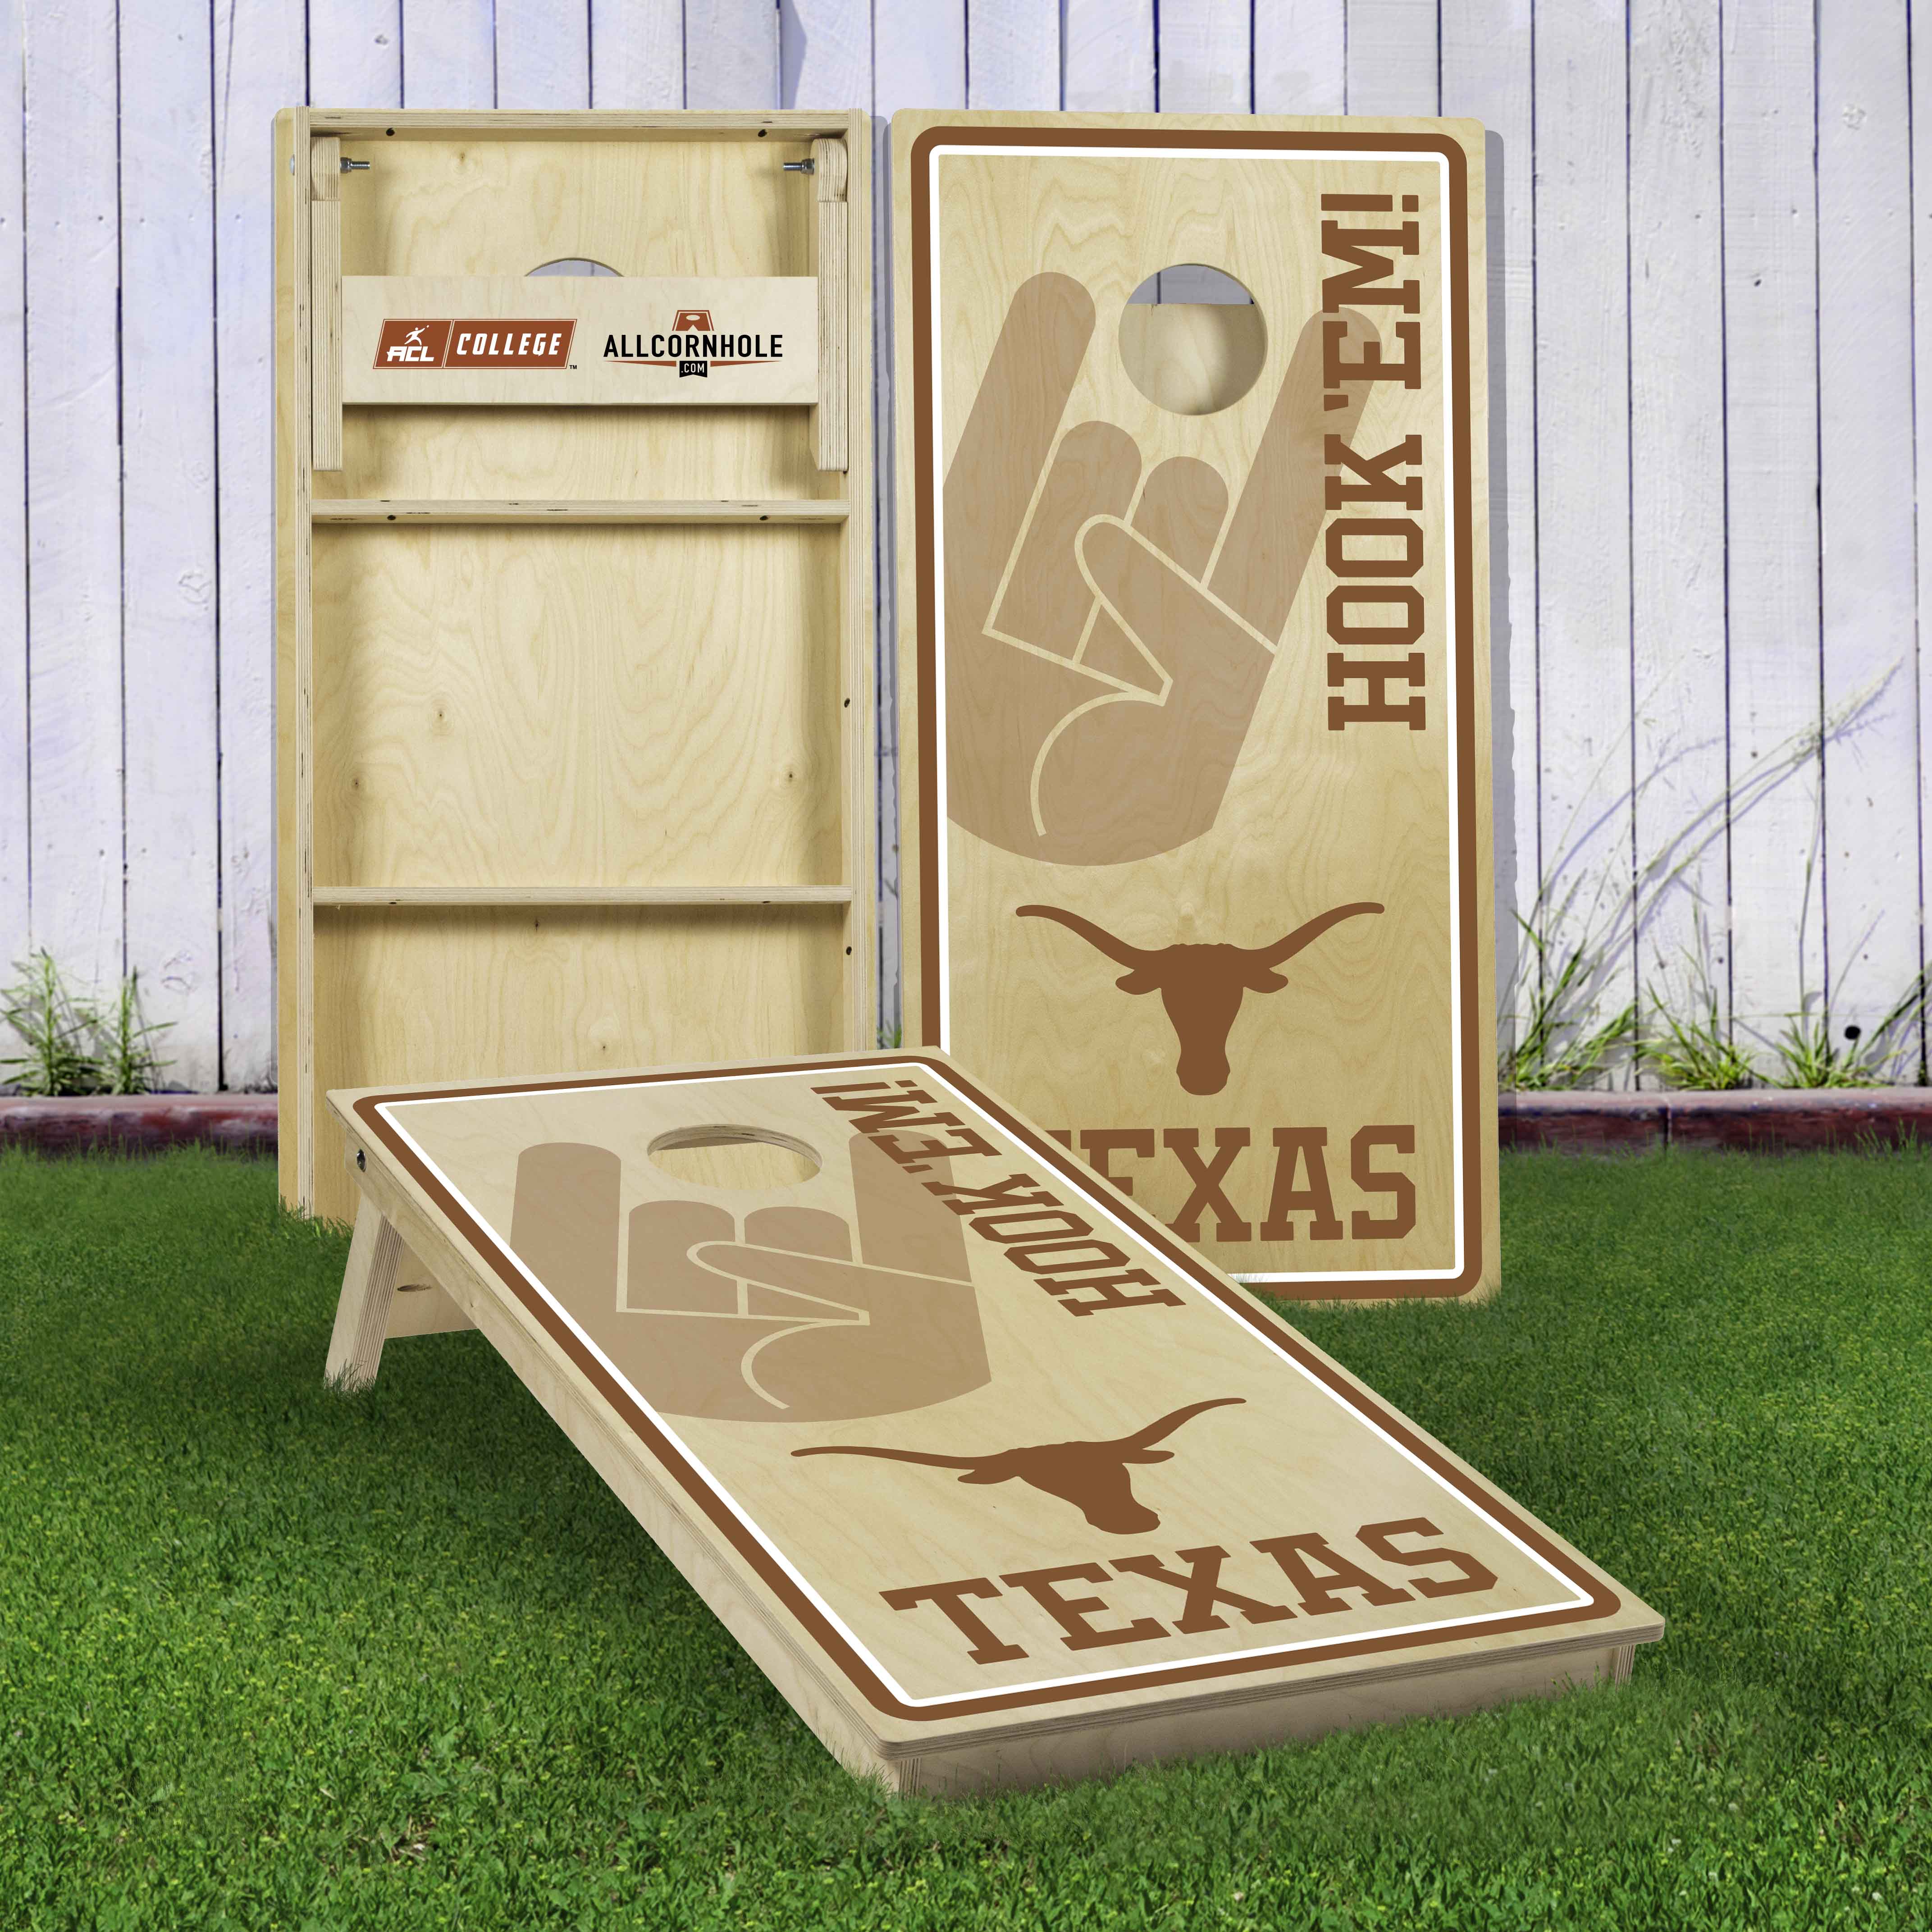 Officially Licensed Collegiate Cornhole Boards - University of Texas at Austin